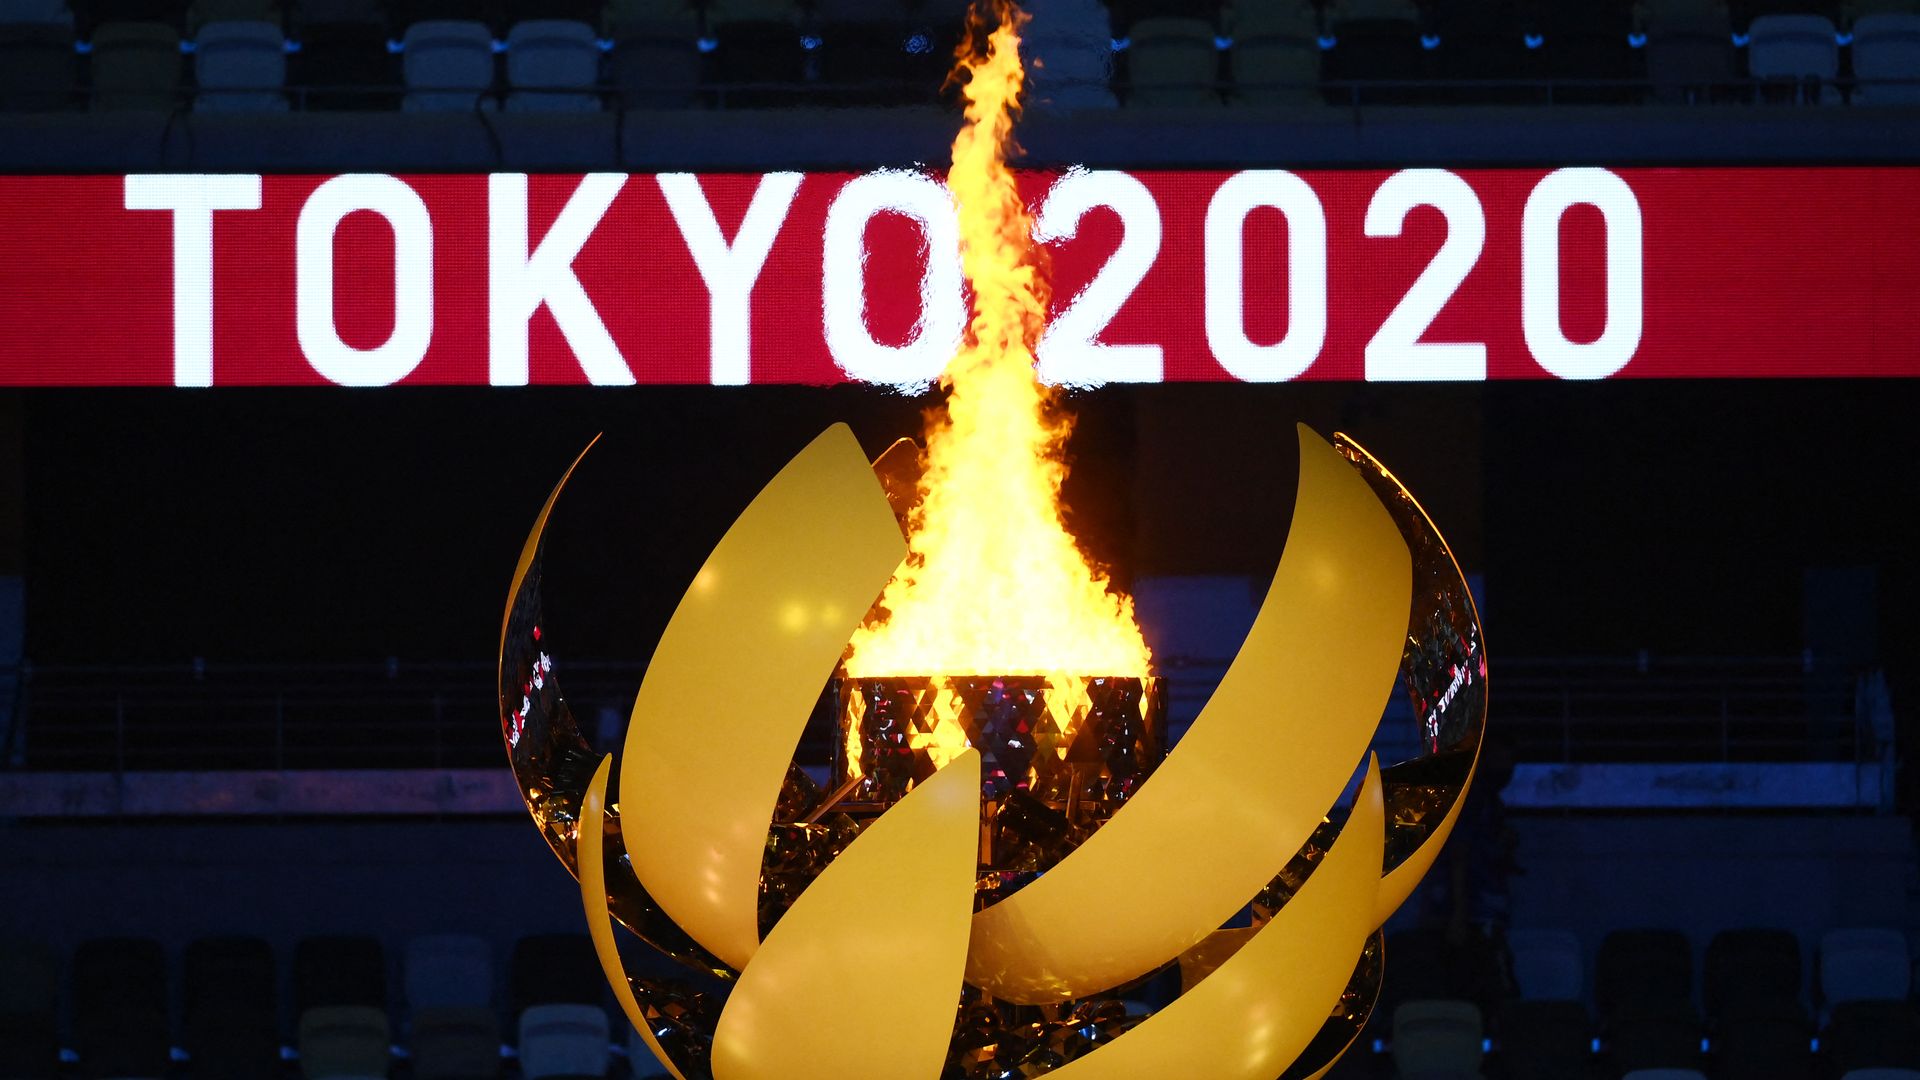 Picture of the cauldron lit with the words "Tokyo 2020 in the background"